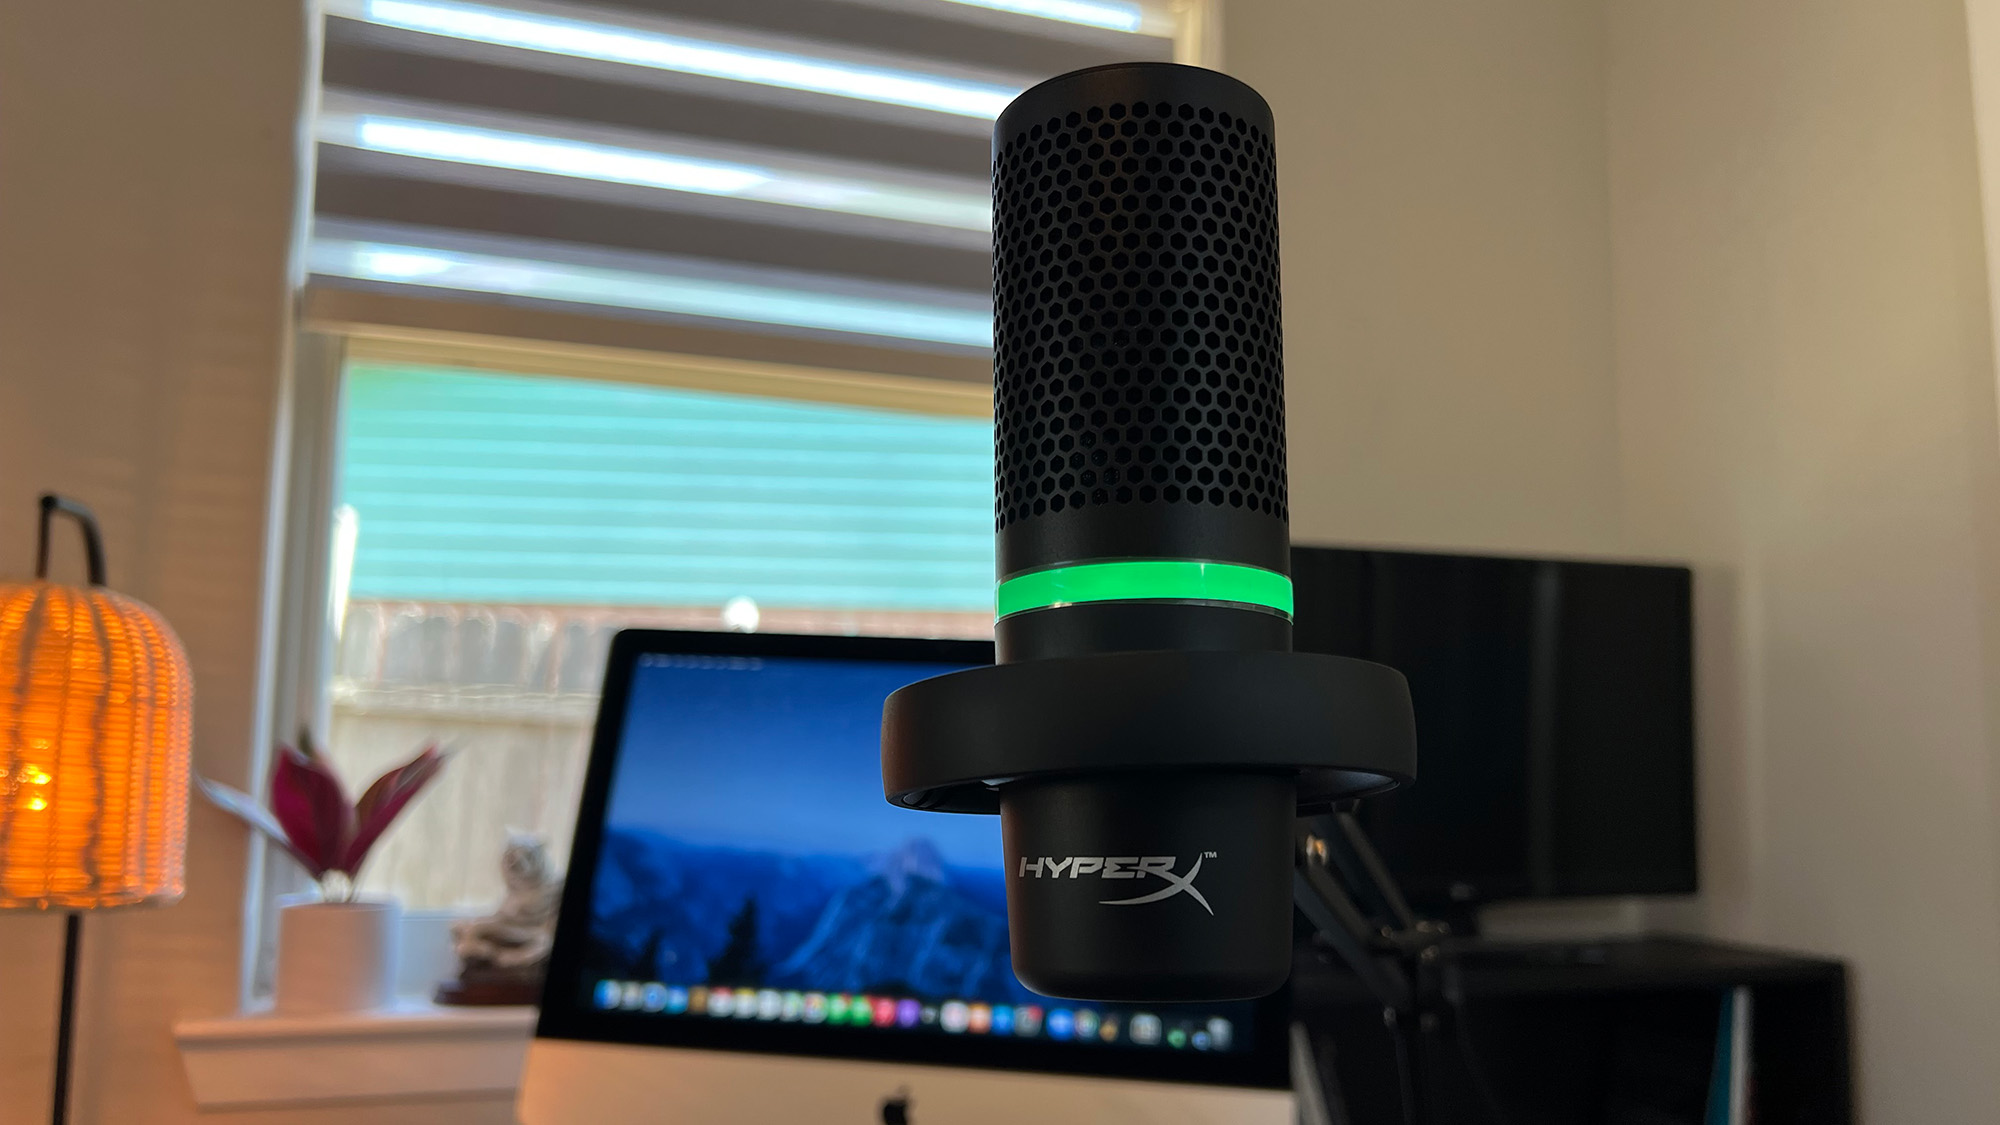 HyperX DuoCast Microphone Review